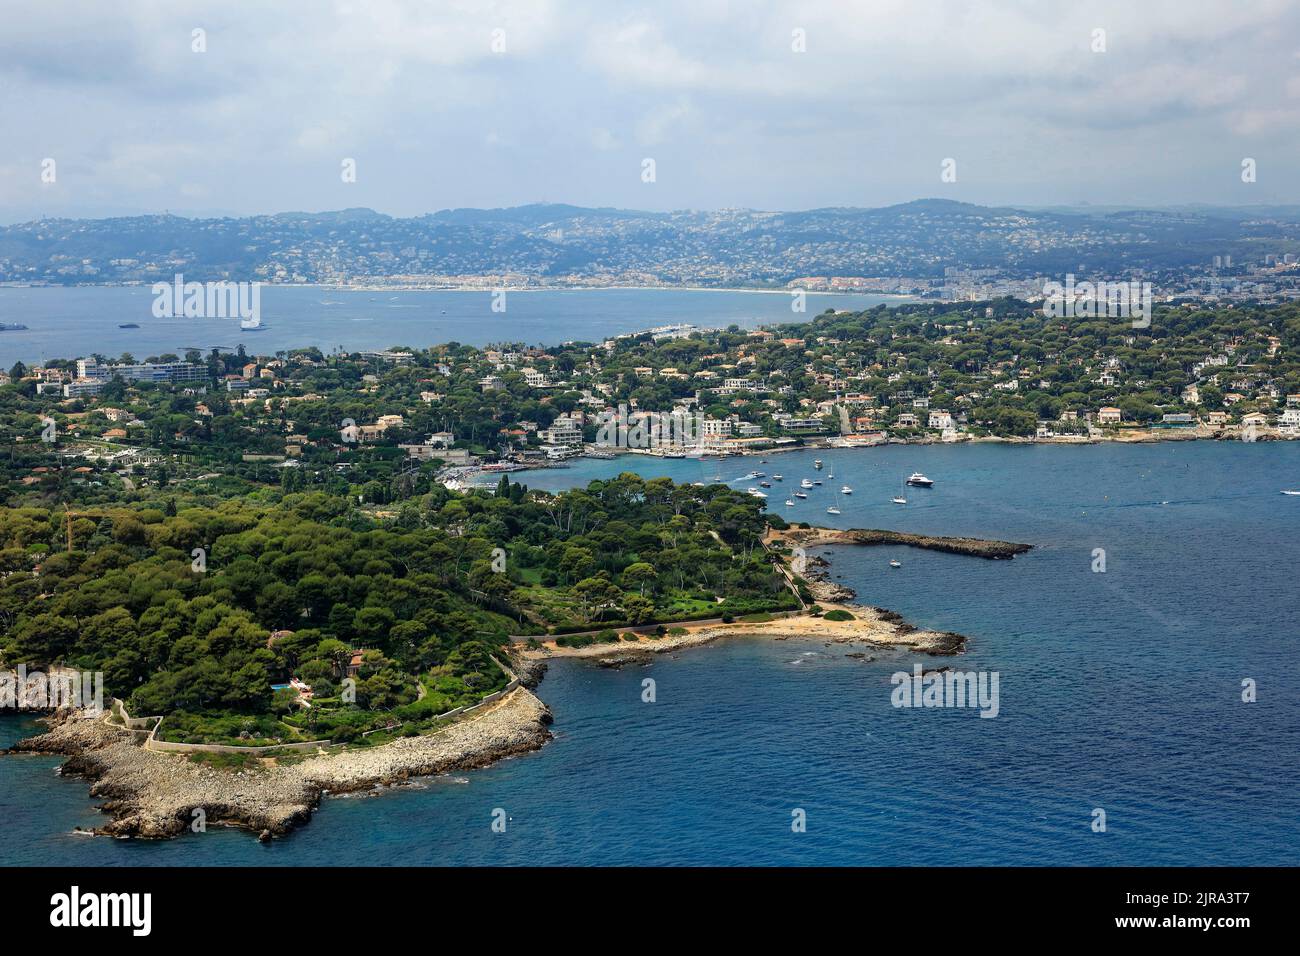 Antibes (south-eastern France): aerial view of the Gaorrupe Cove, in the Peninsula of Antibes, with buildings and villas along the waterfront Stock Photo